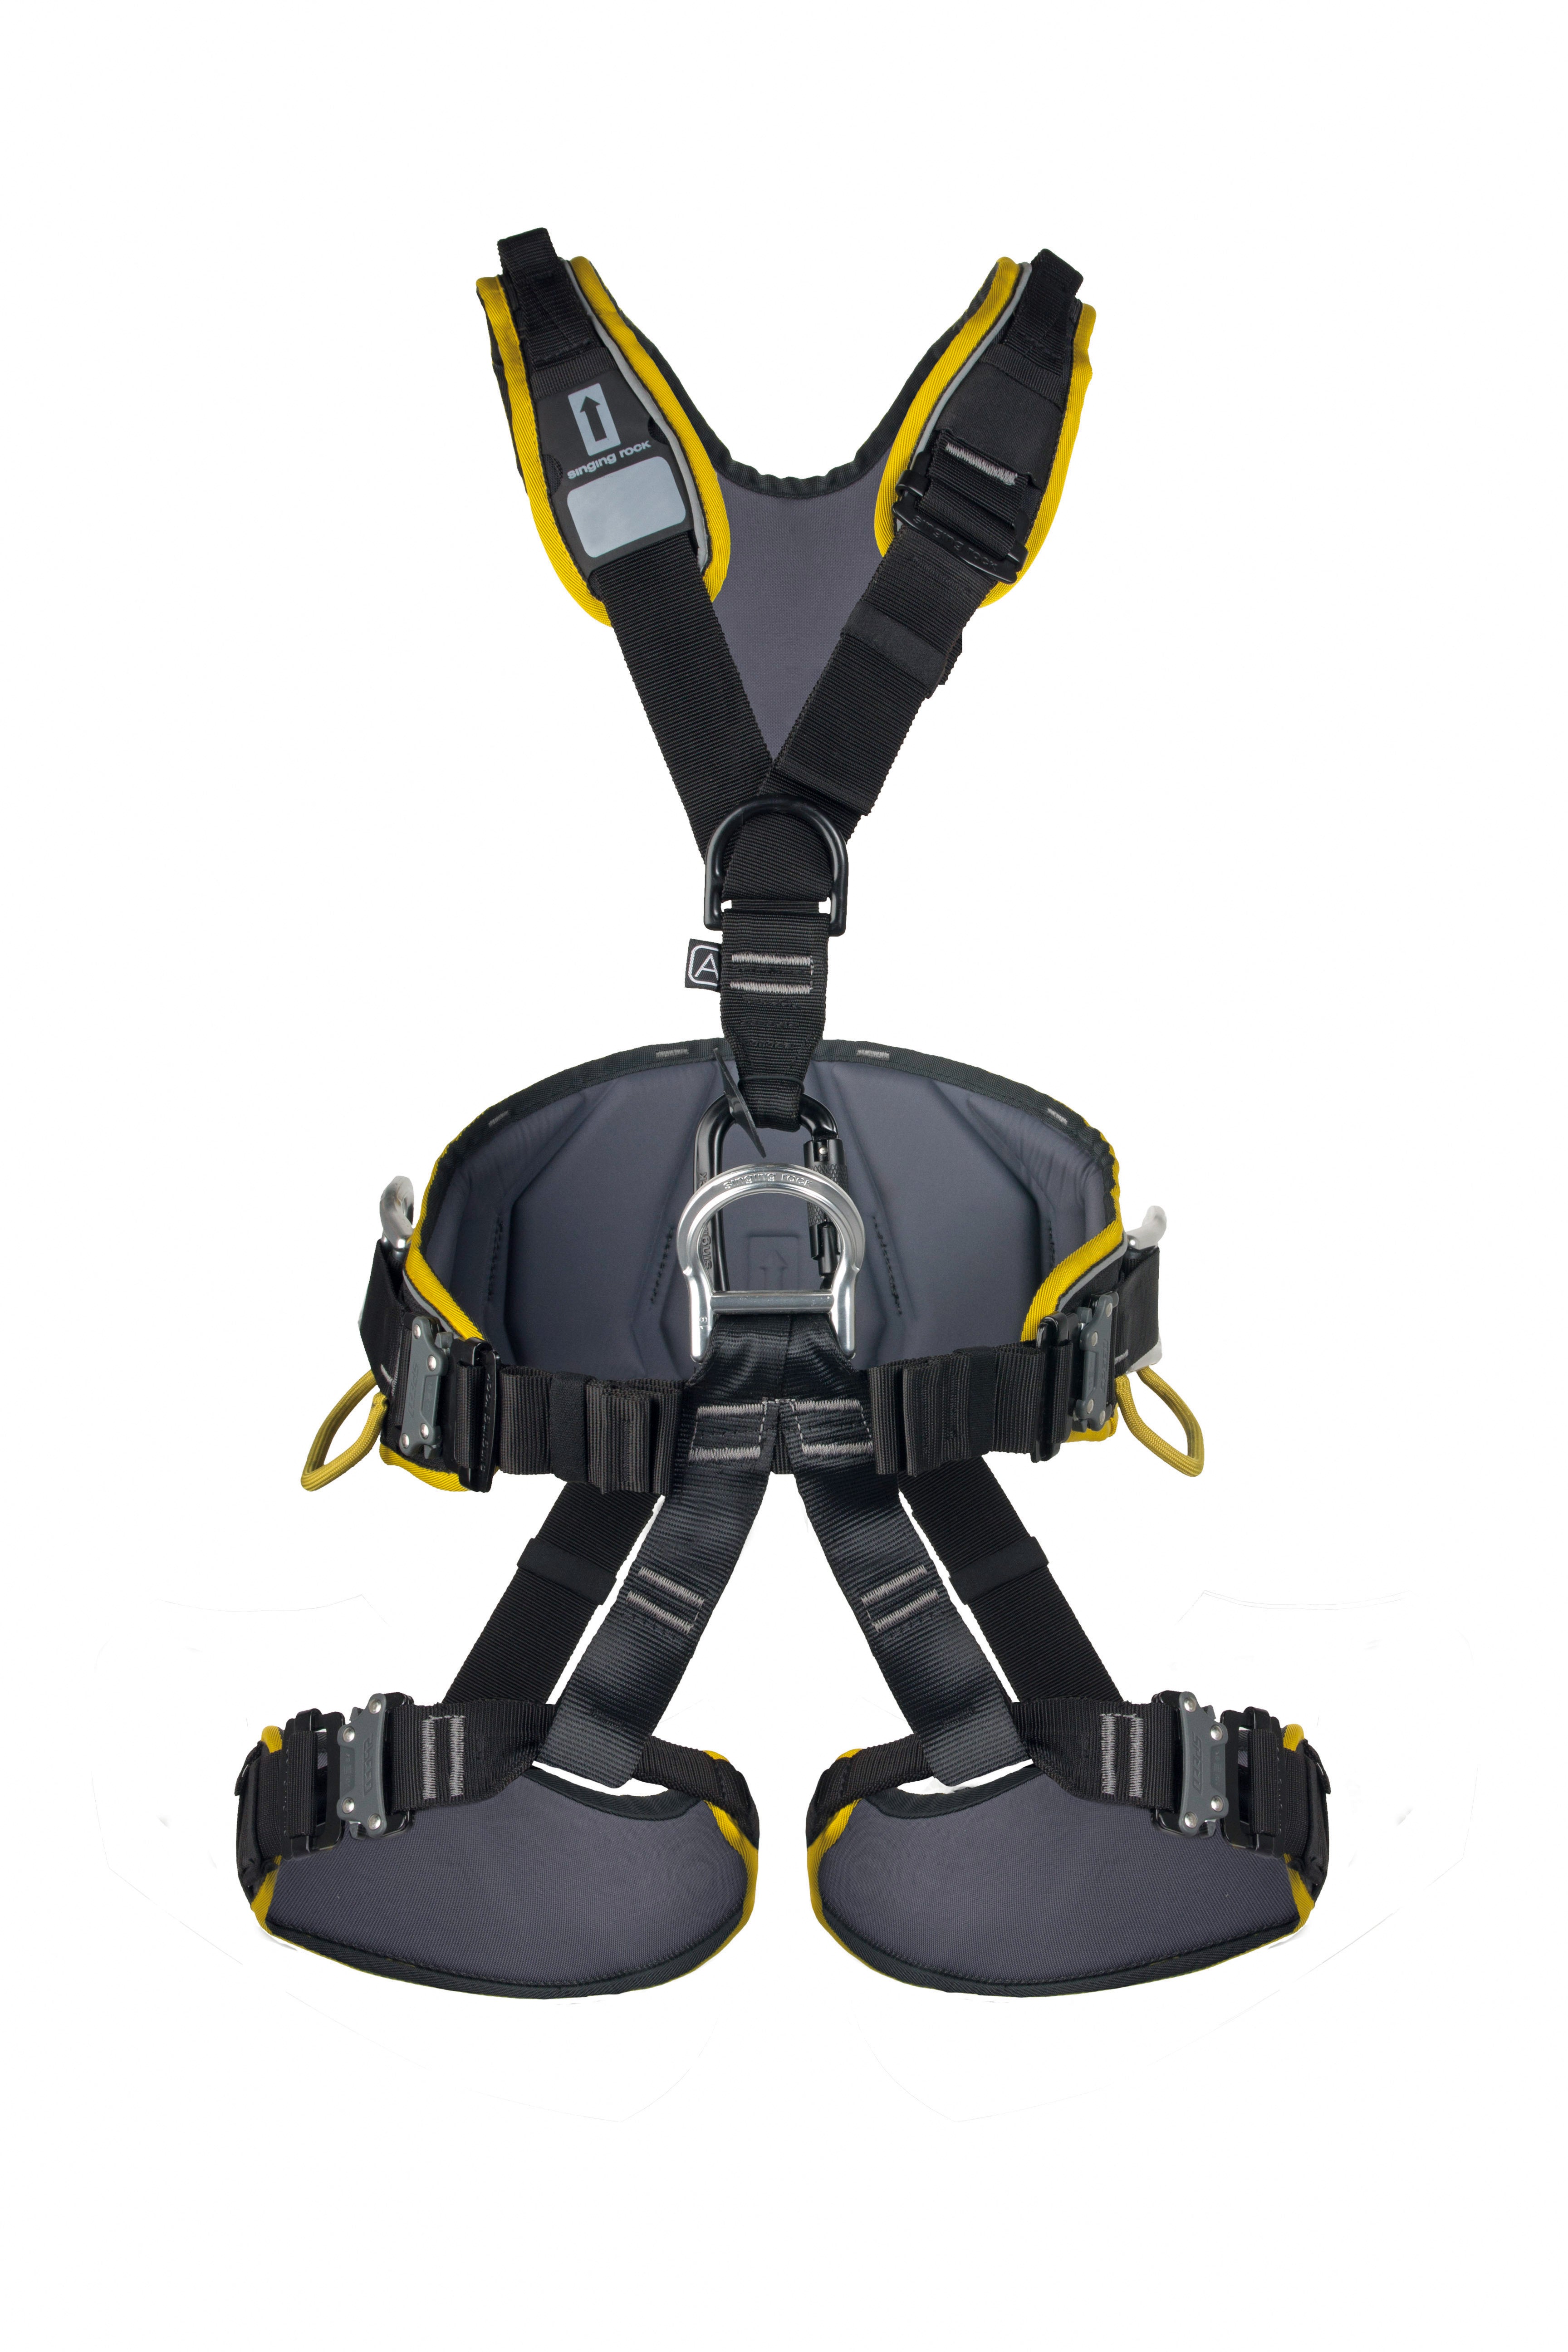  Rope Access Harness Singing Rock Expert 3D Speed